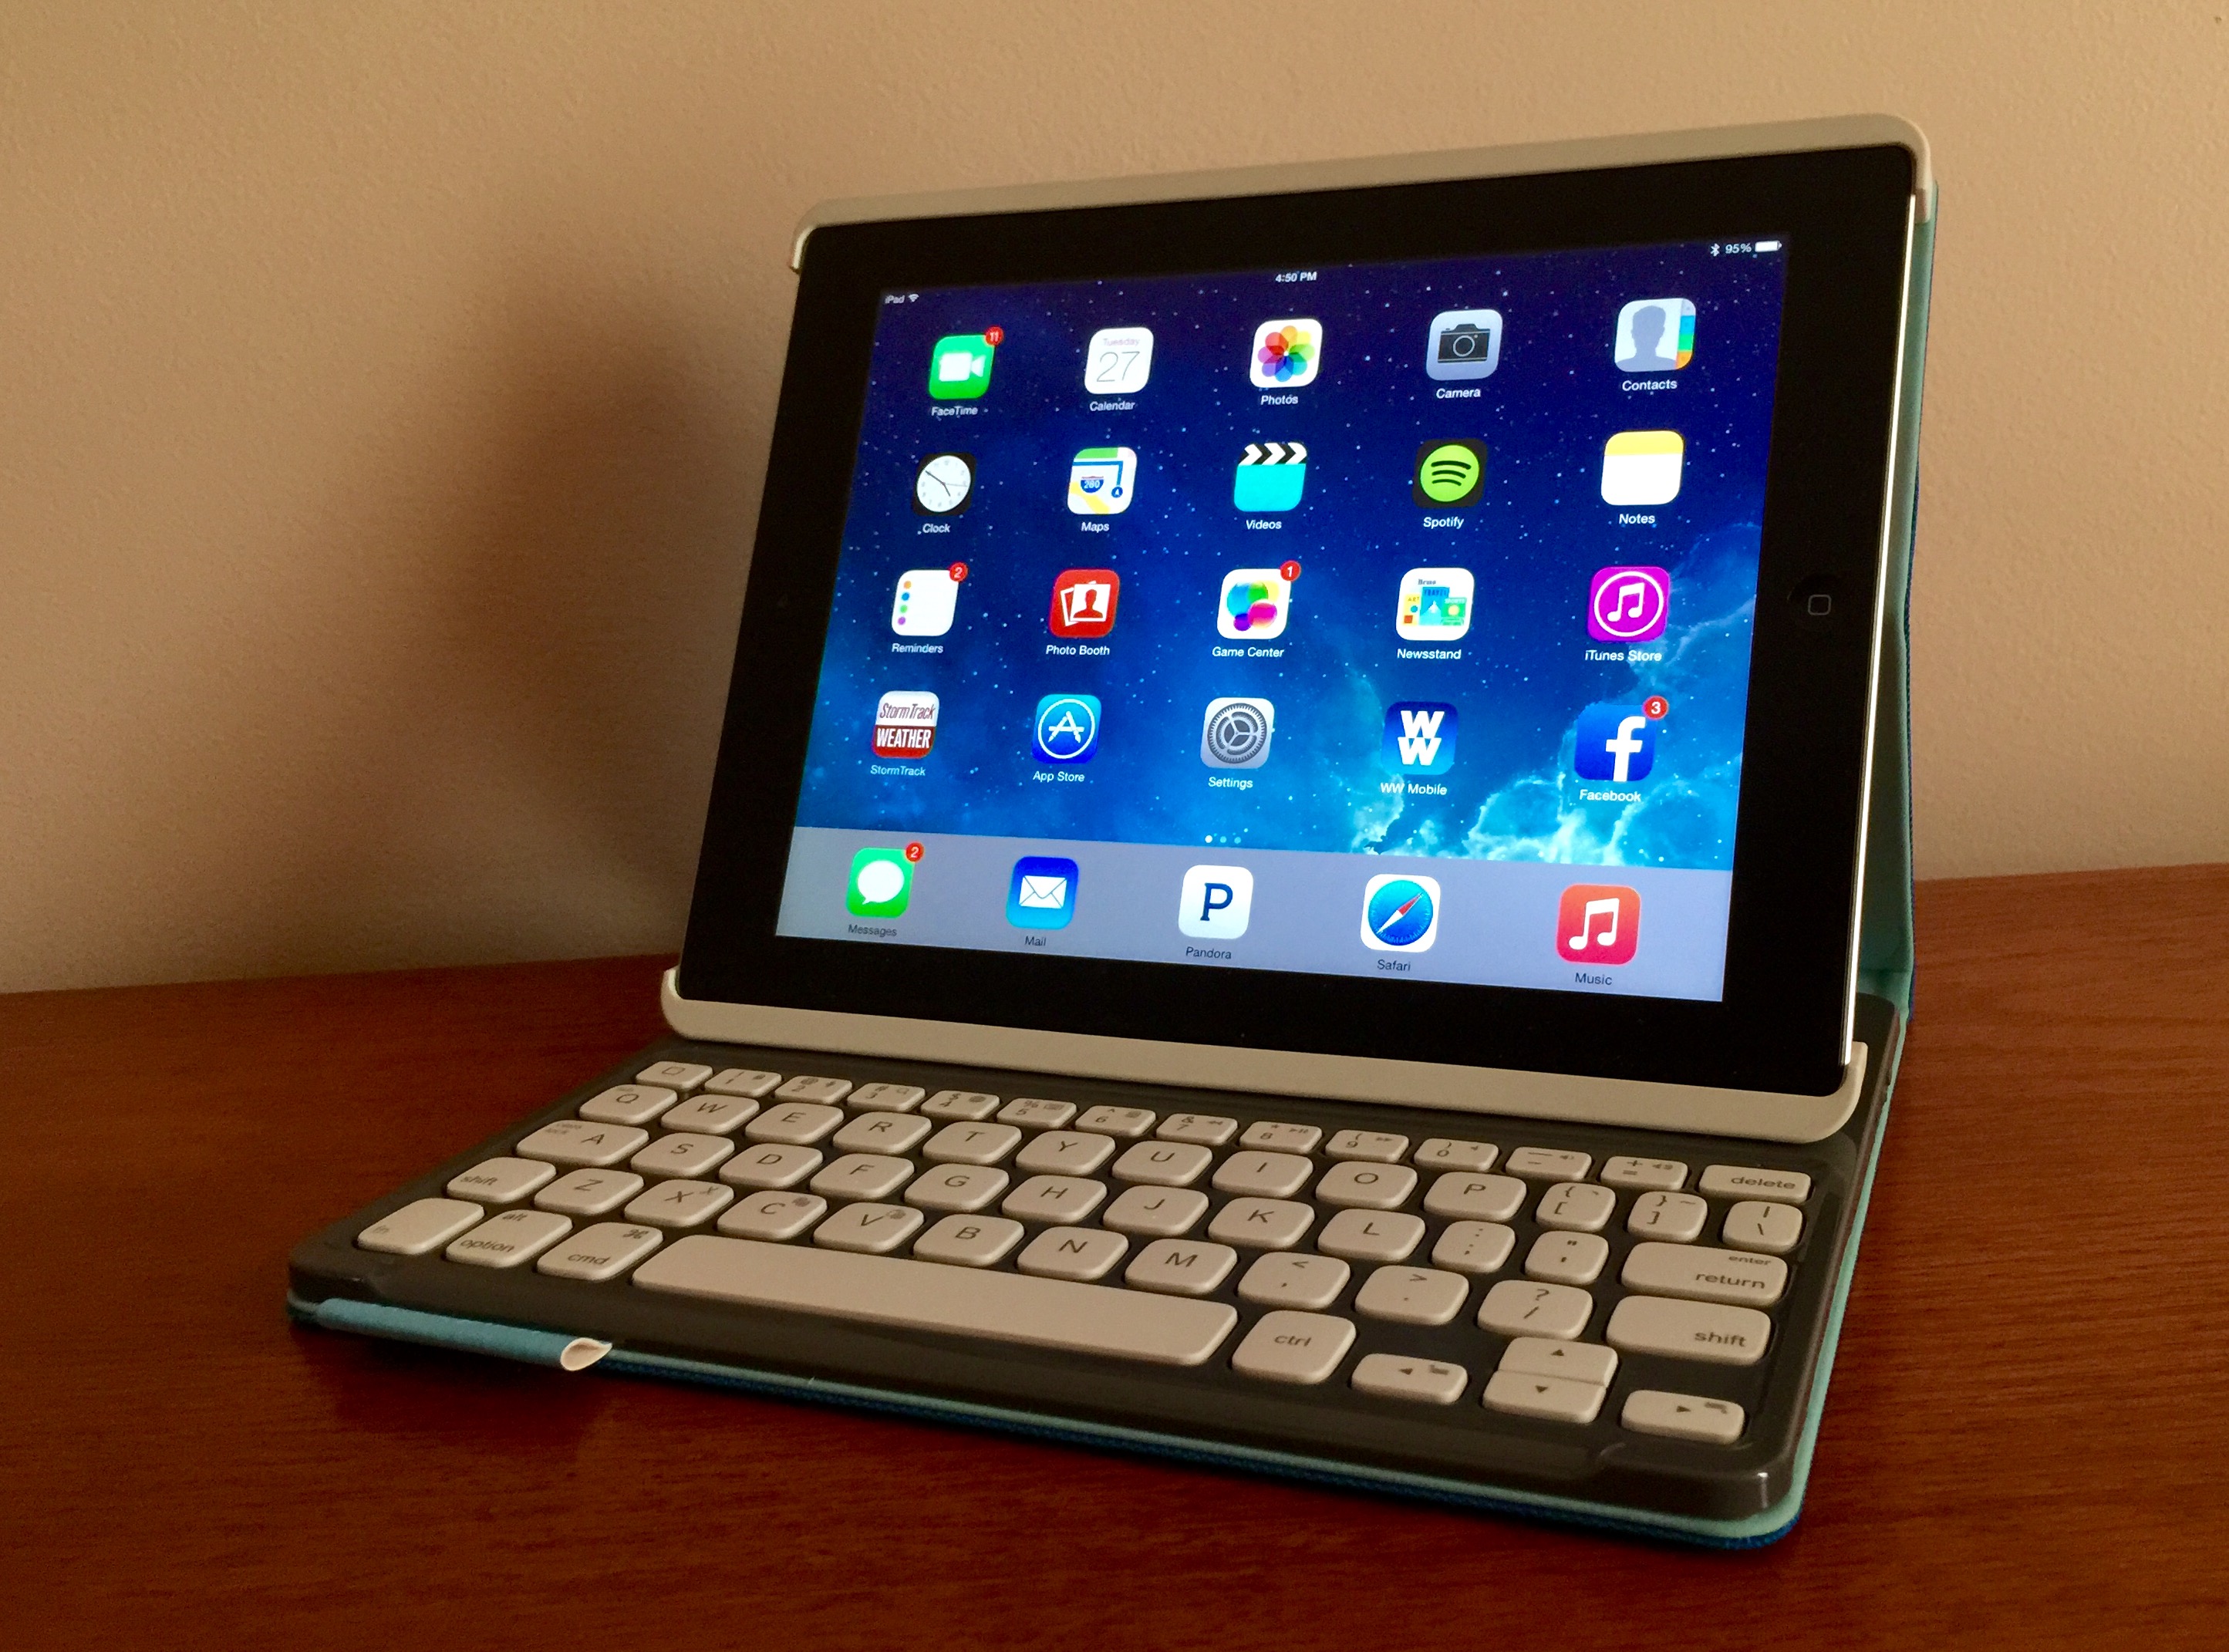 There are no iOS 8.1.3 Bluetooth problems on our iPad 3.